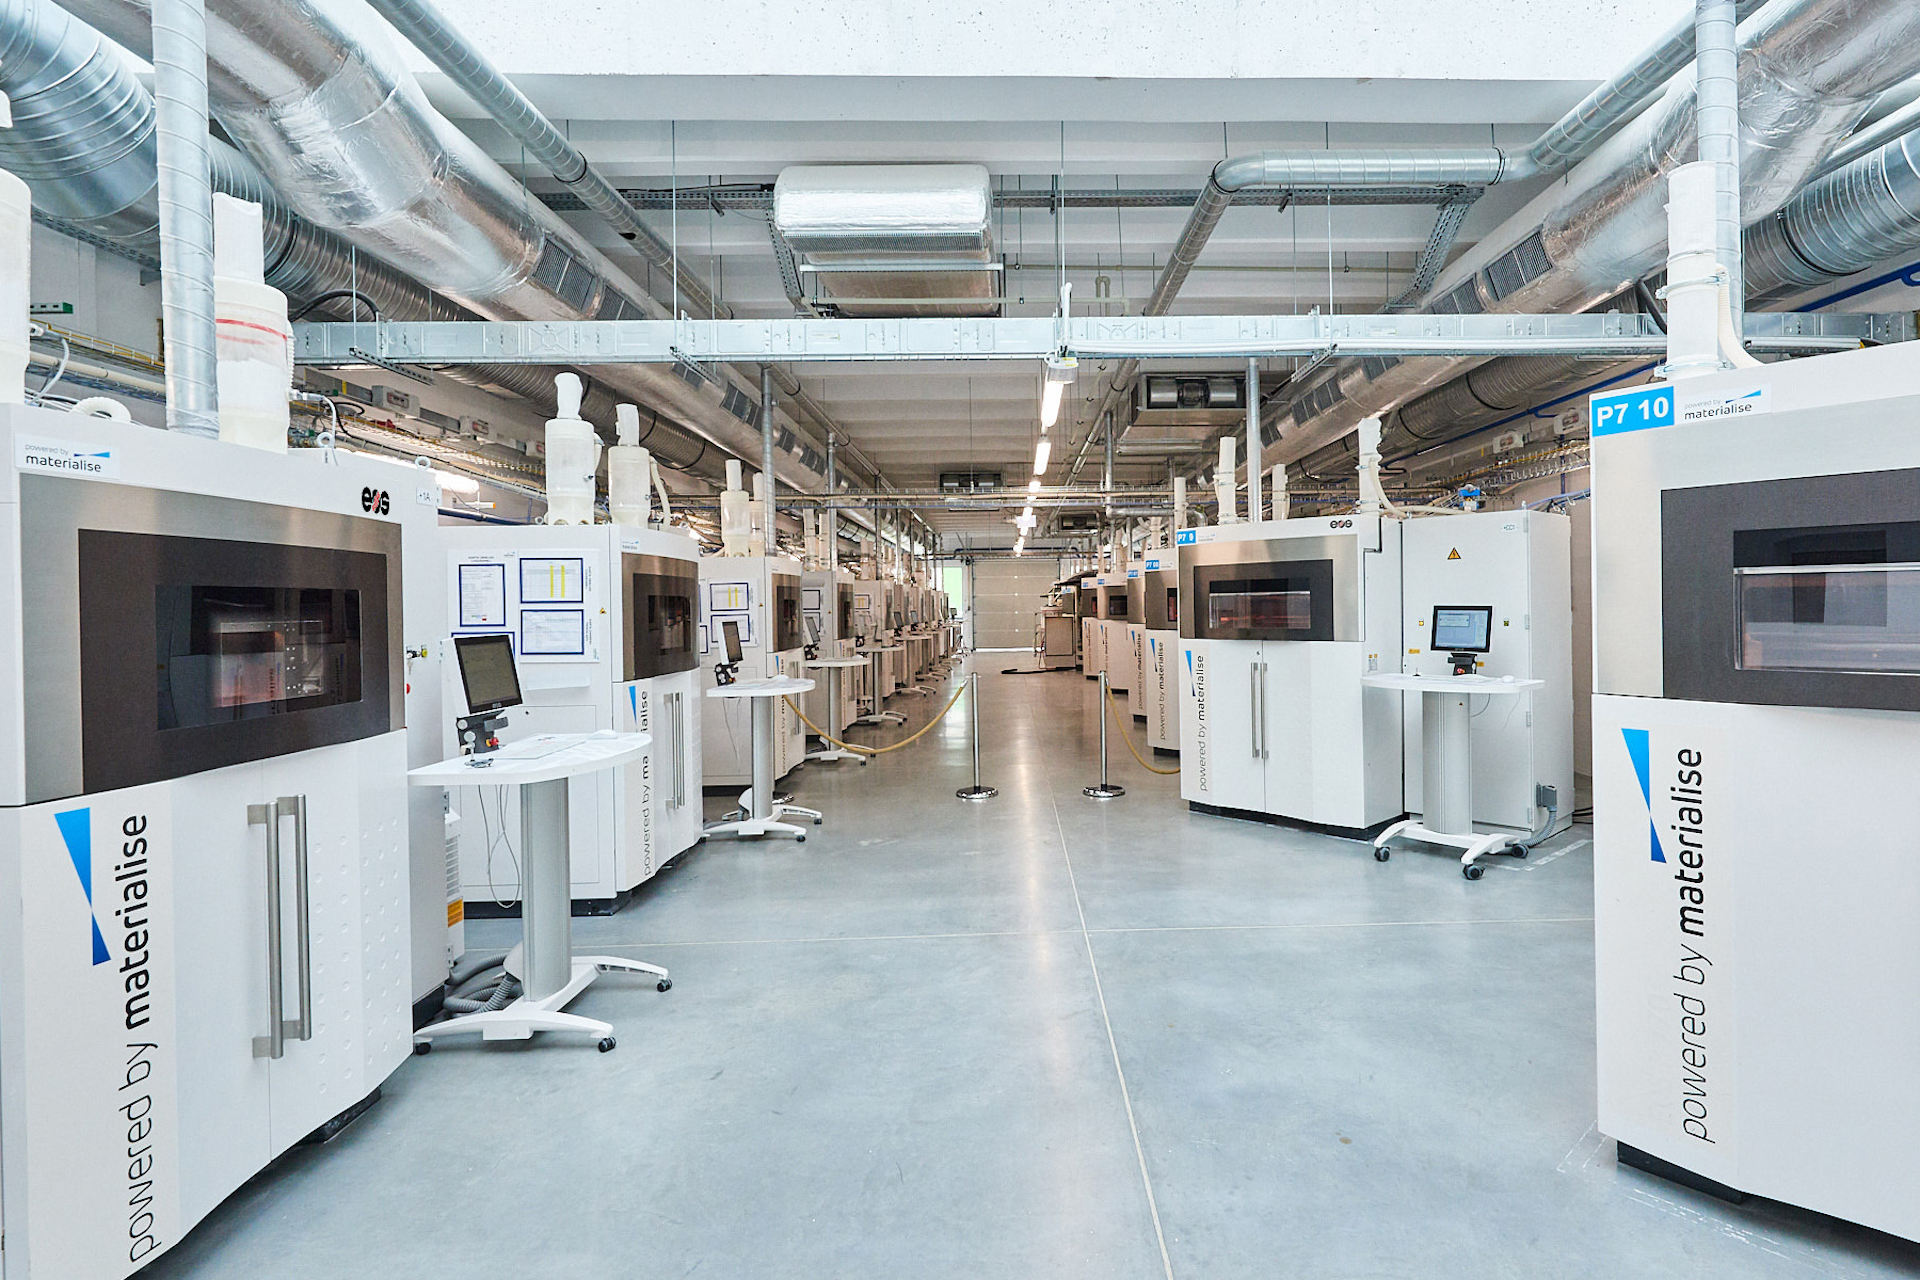 A lab full of 3D printers labelled "powered by materialise" in an image for a Meltwater customer story.